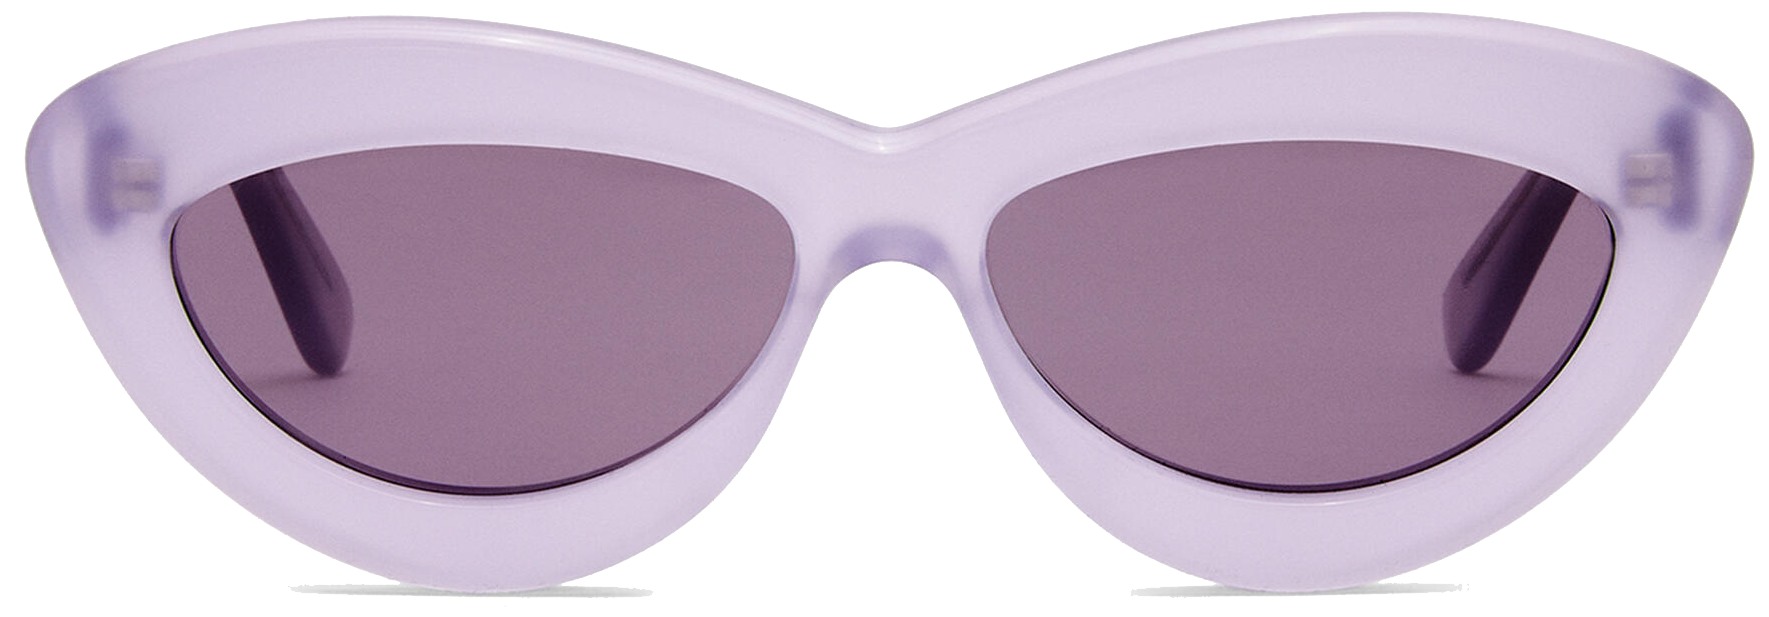 Sunglasses (LW40096 Lilac) | style